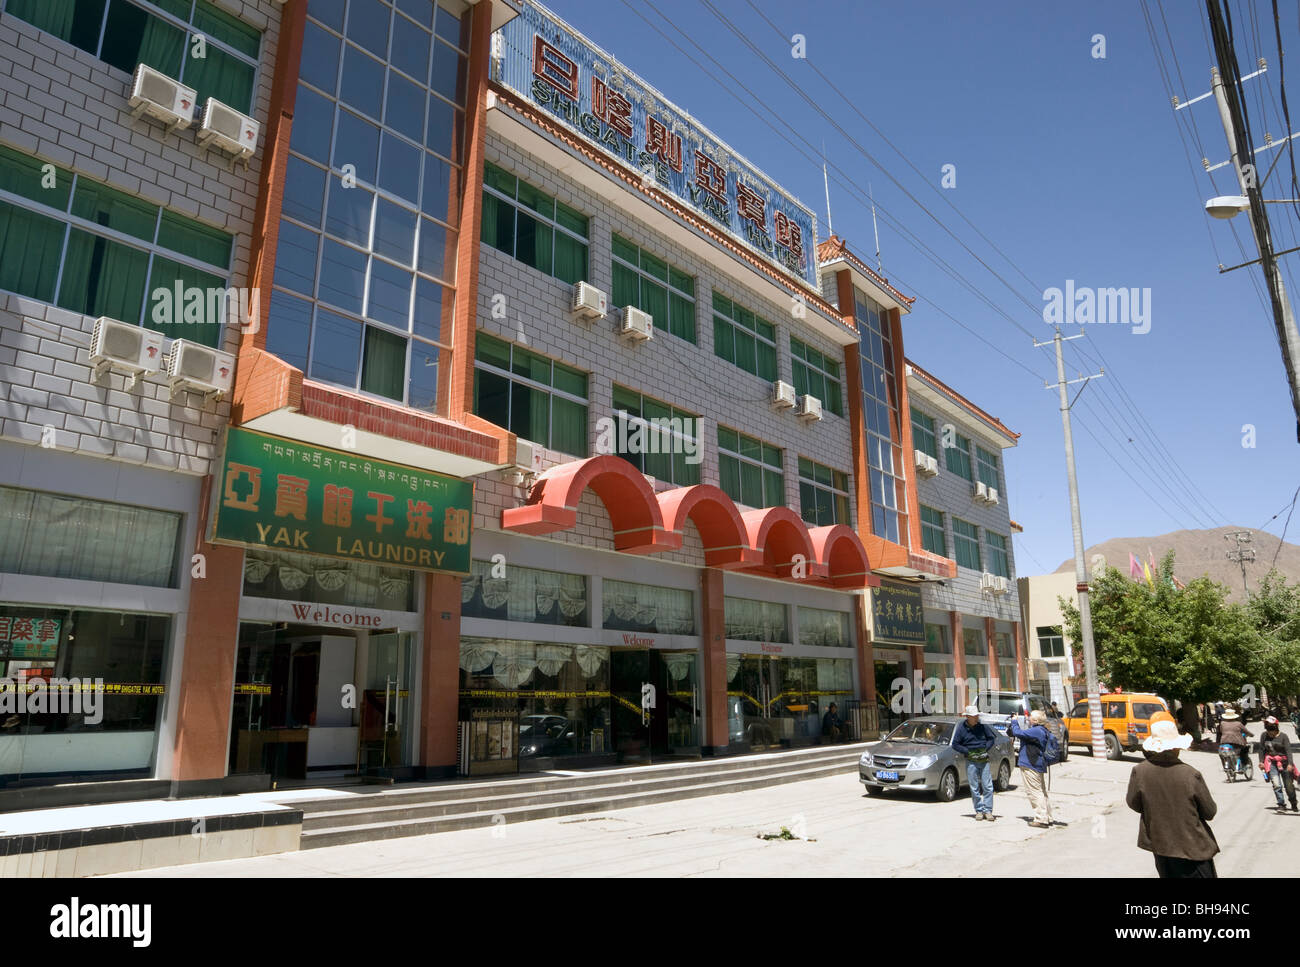 typical strret scene in the new chinese quarter of shigatse Stock Photo